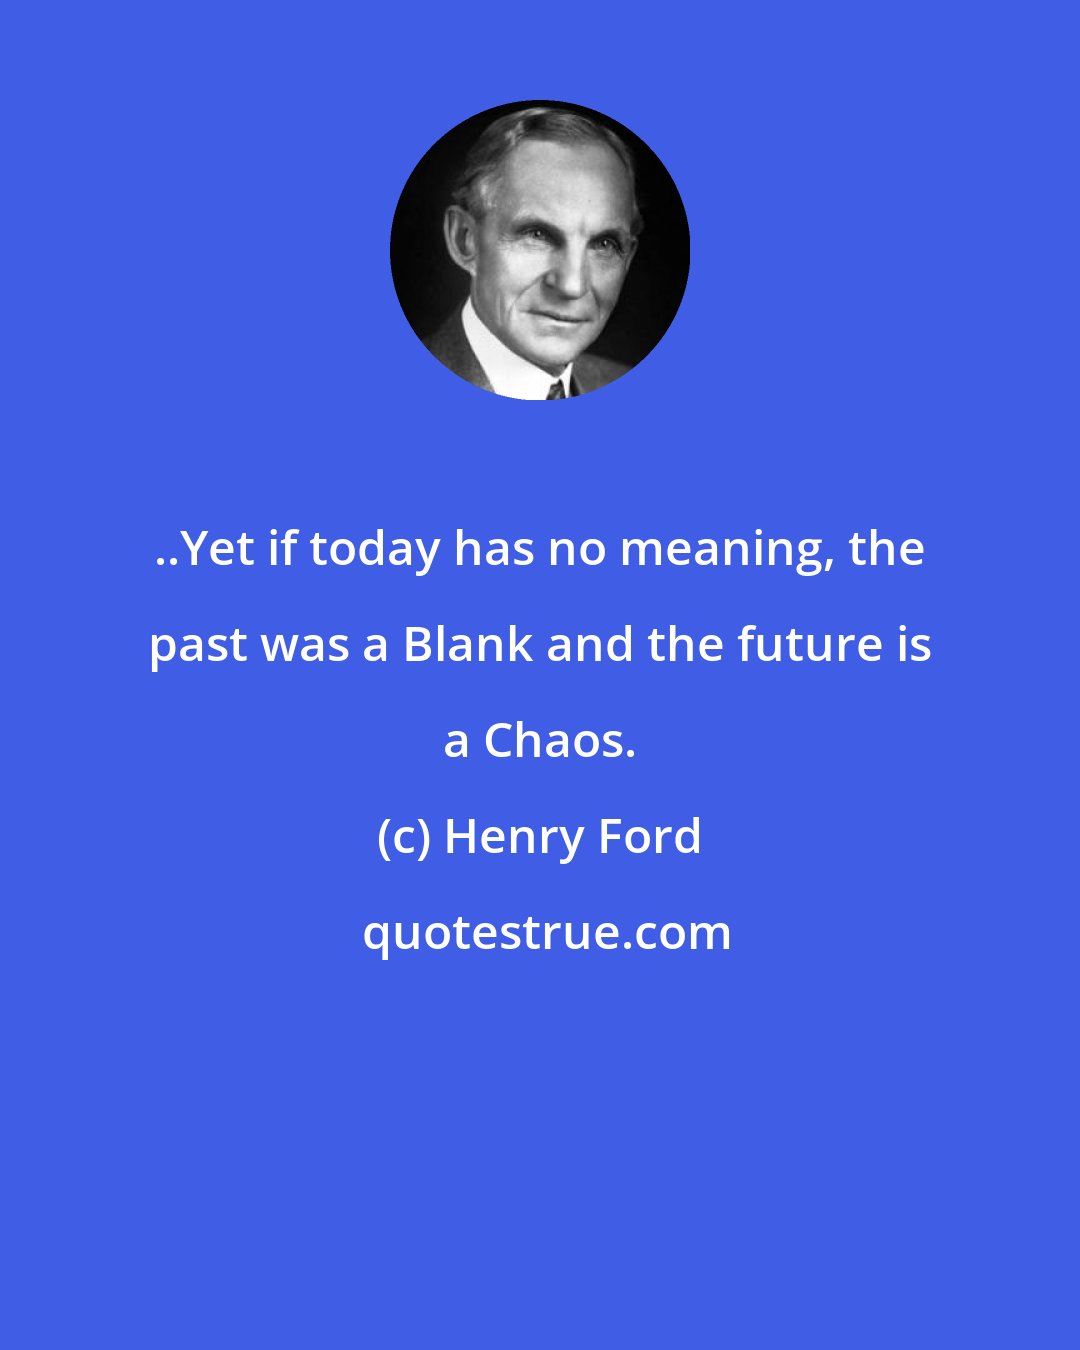 Henry Ford: ..Yet if today has no meaning, the past was a Blank and the future is a Chaos.